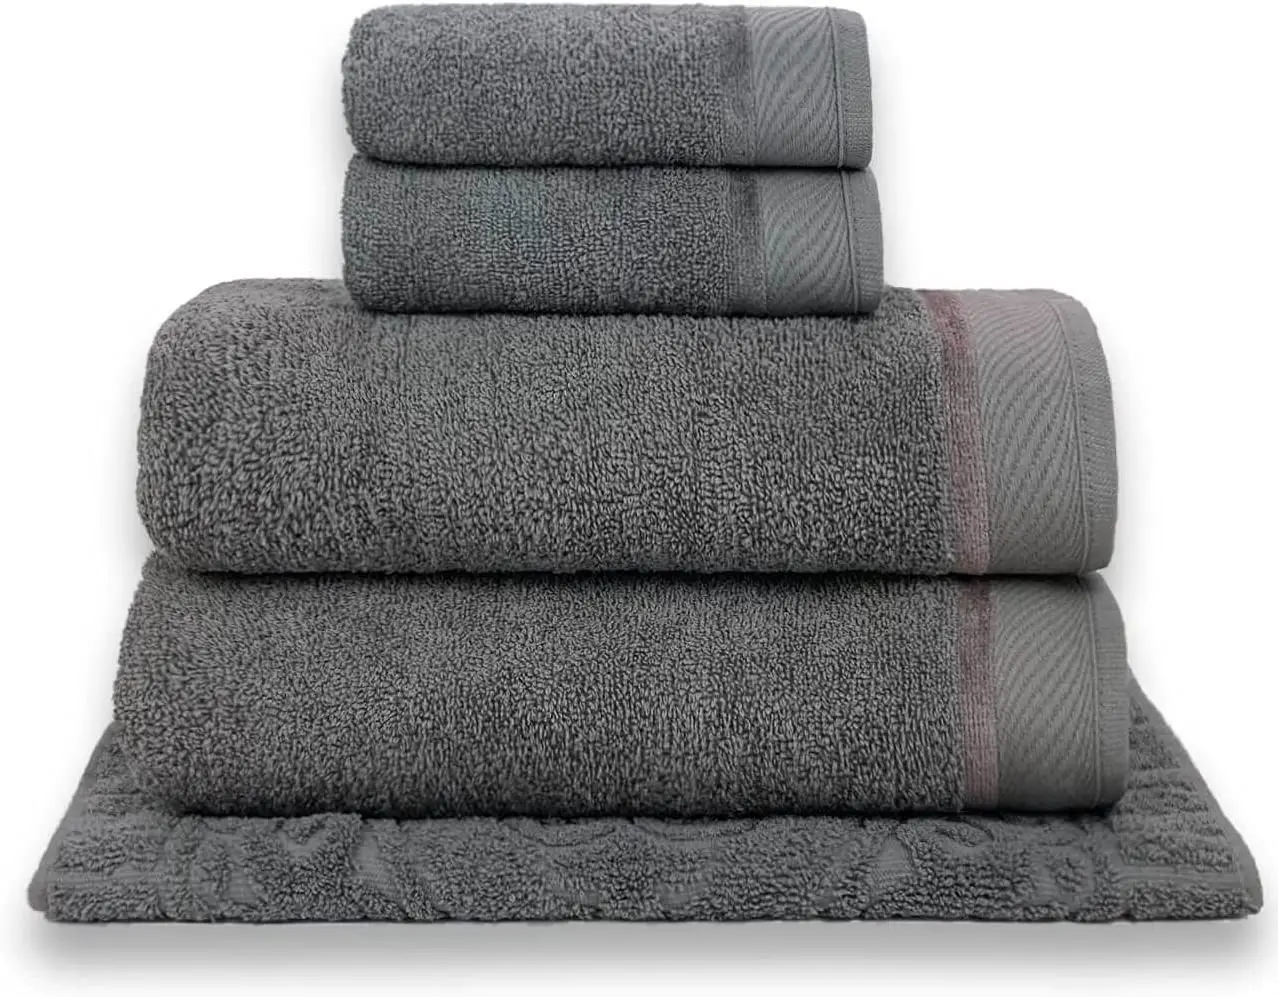 

car wash Giant Thick Towels 5 Pieces Luxury Game - Canada (Gris) Microfiber Towels Bathroom Hotel Bath Towels For Thicken Soft C